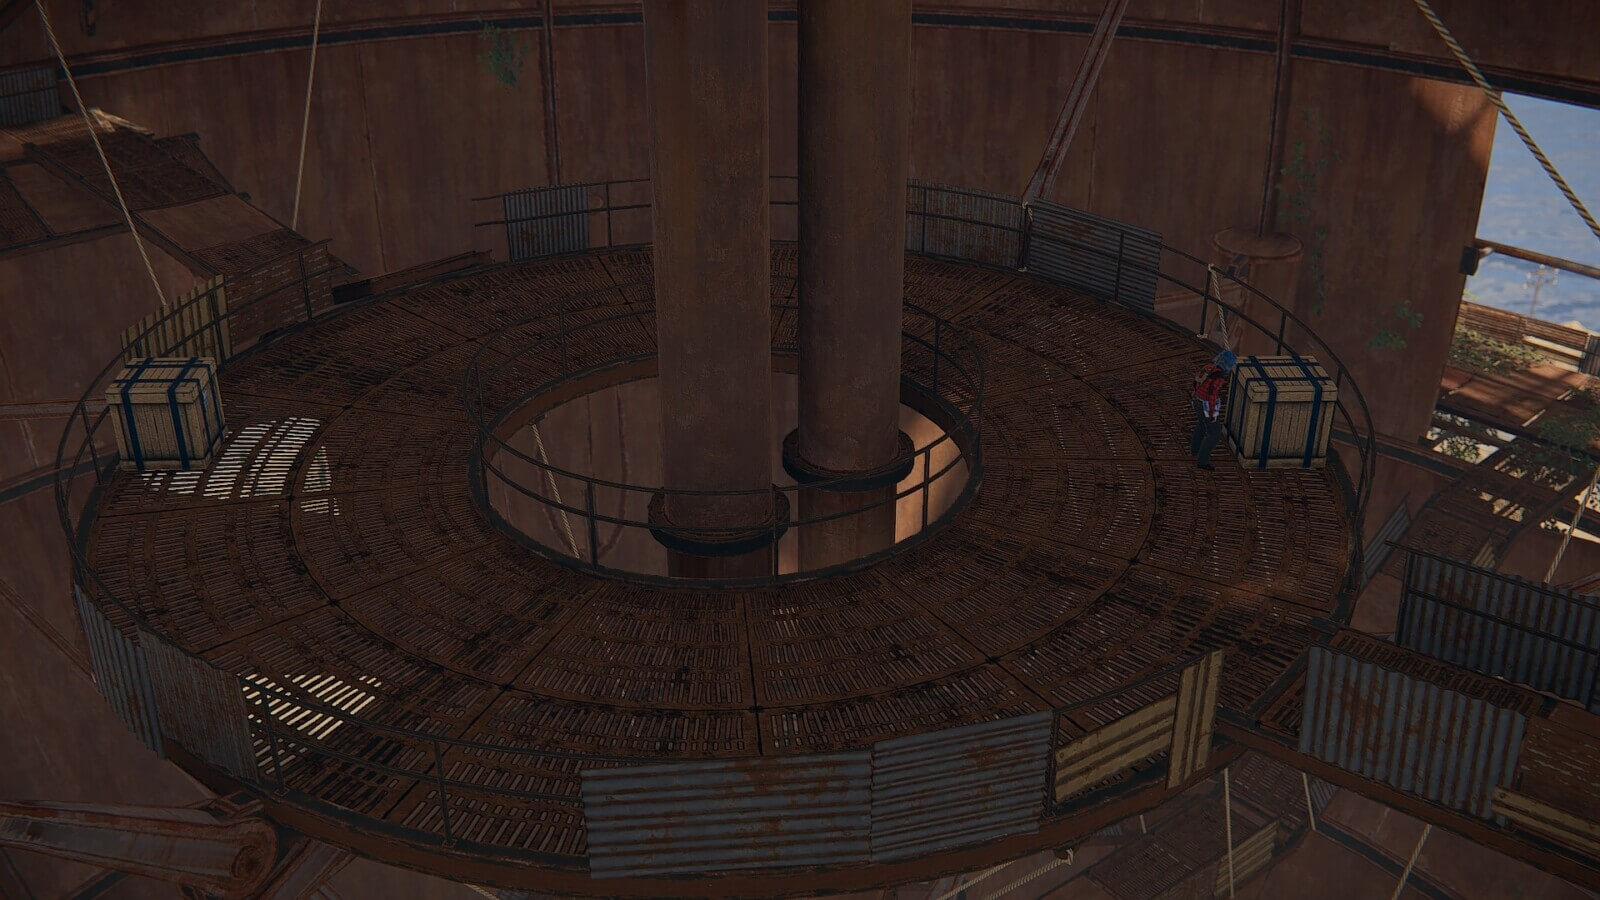 Halfway up the Sphere tank you'll find another round catwalk which includes 2 brown crate spawns.